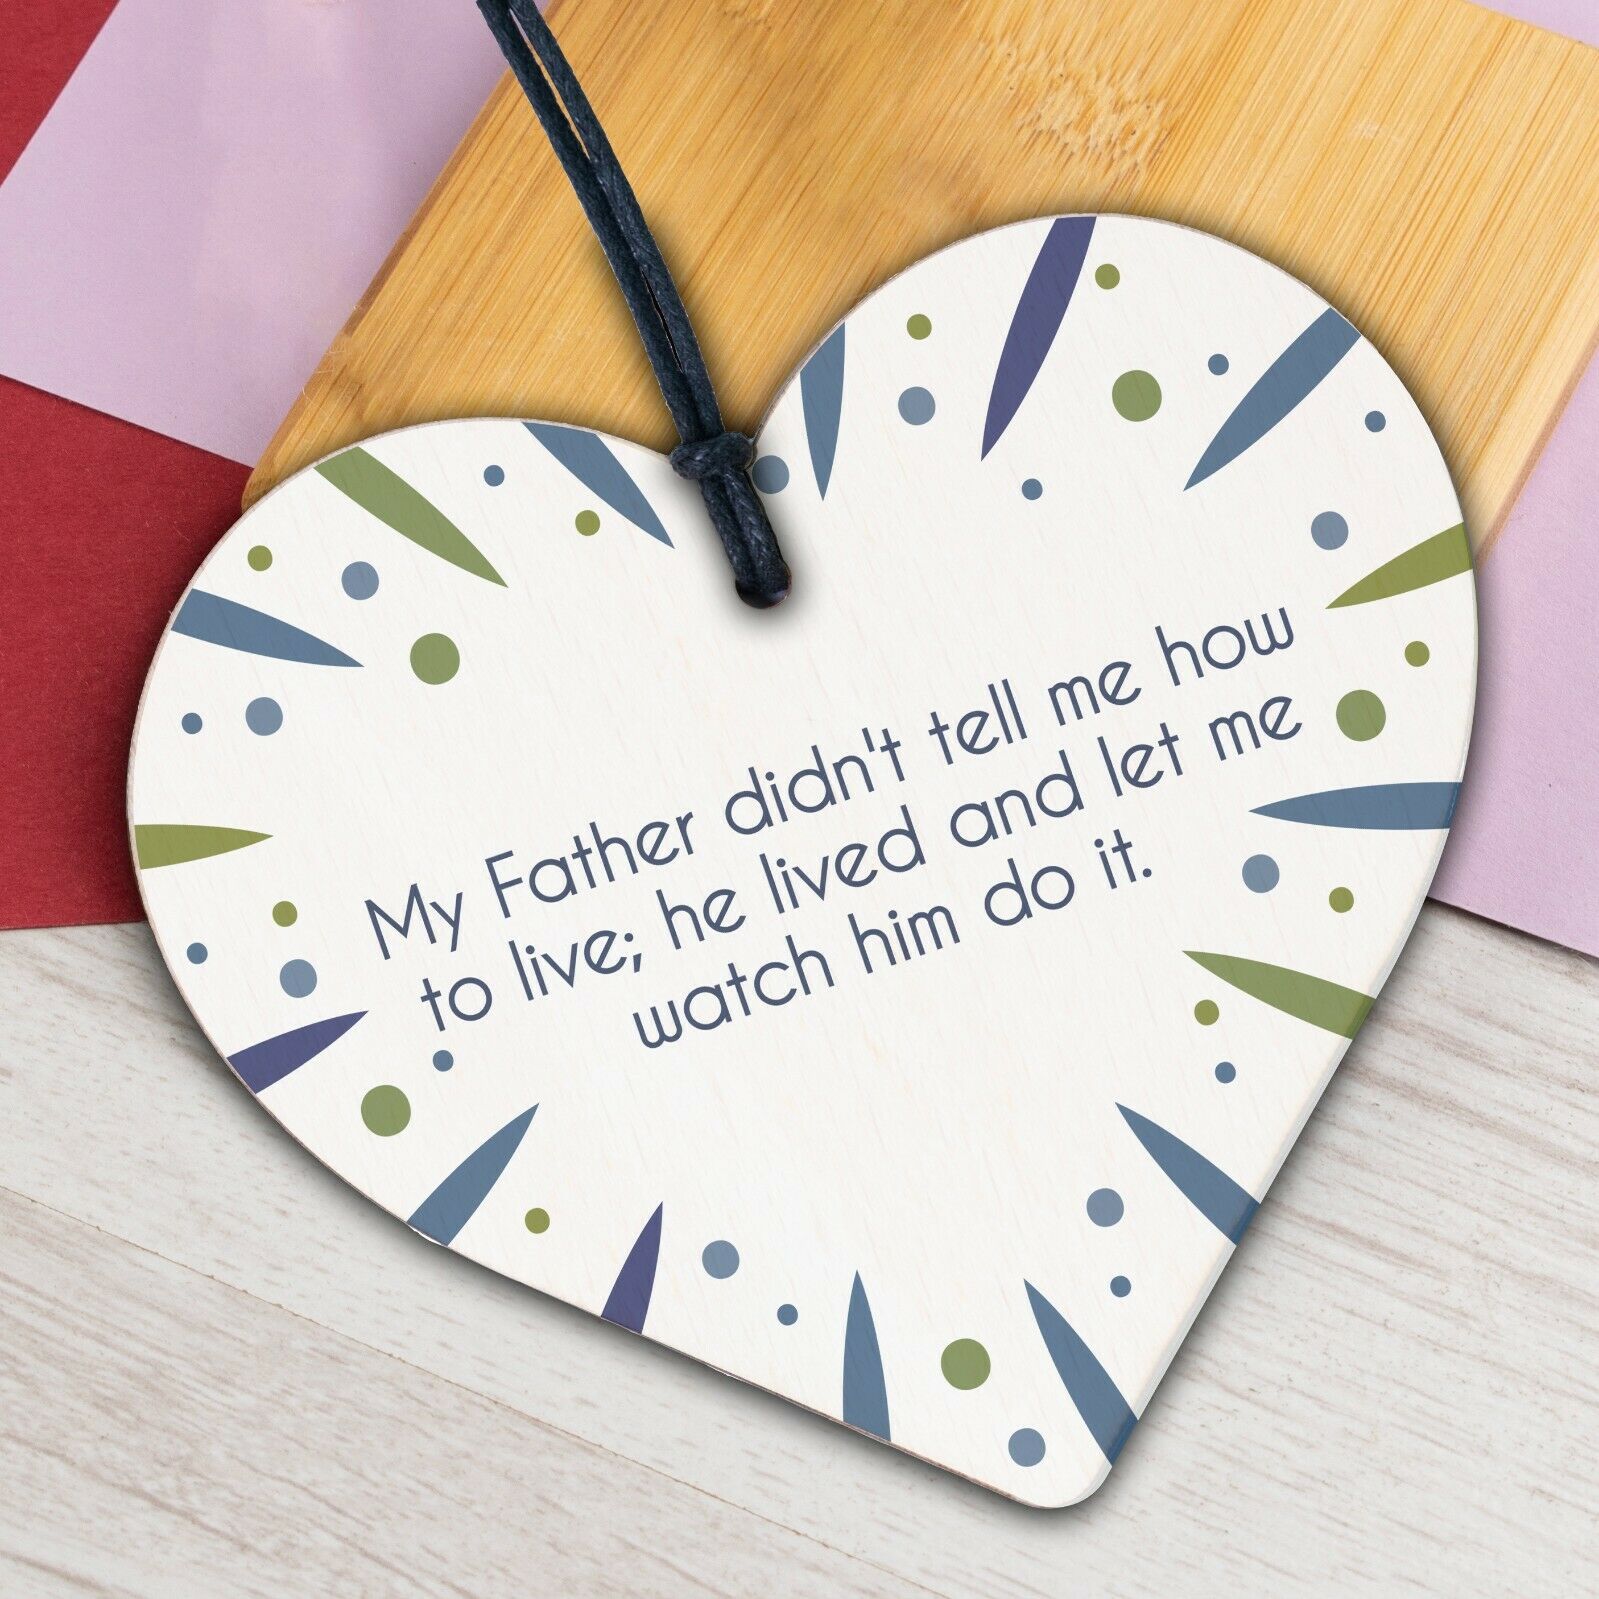 Dad Special One Hanging Wooden Heart FATHERS DAY Gifts For Him Special THANK YOU